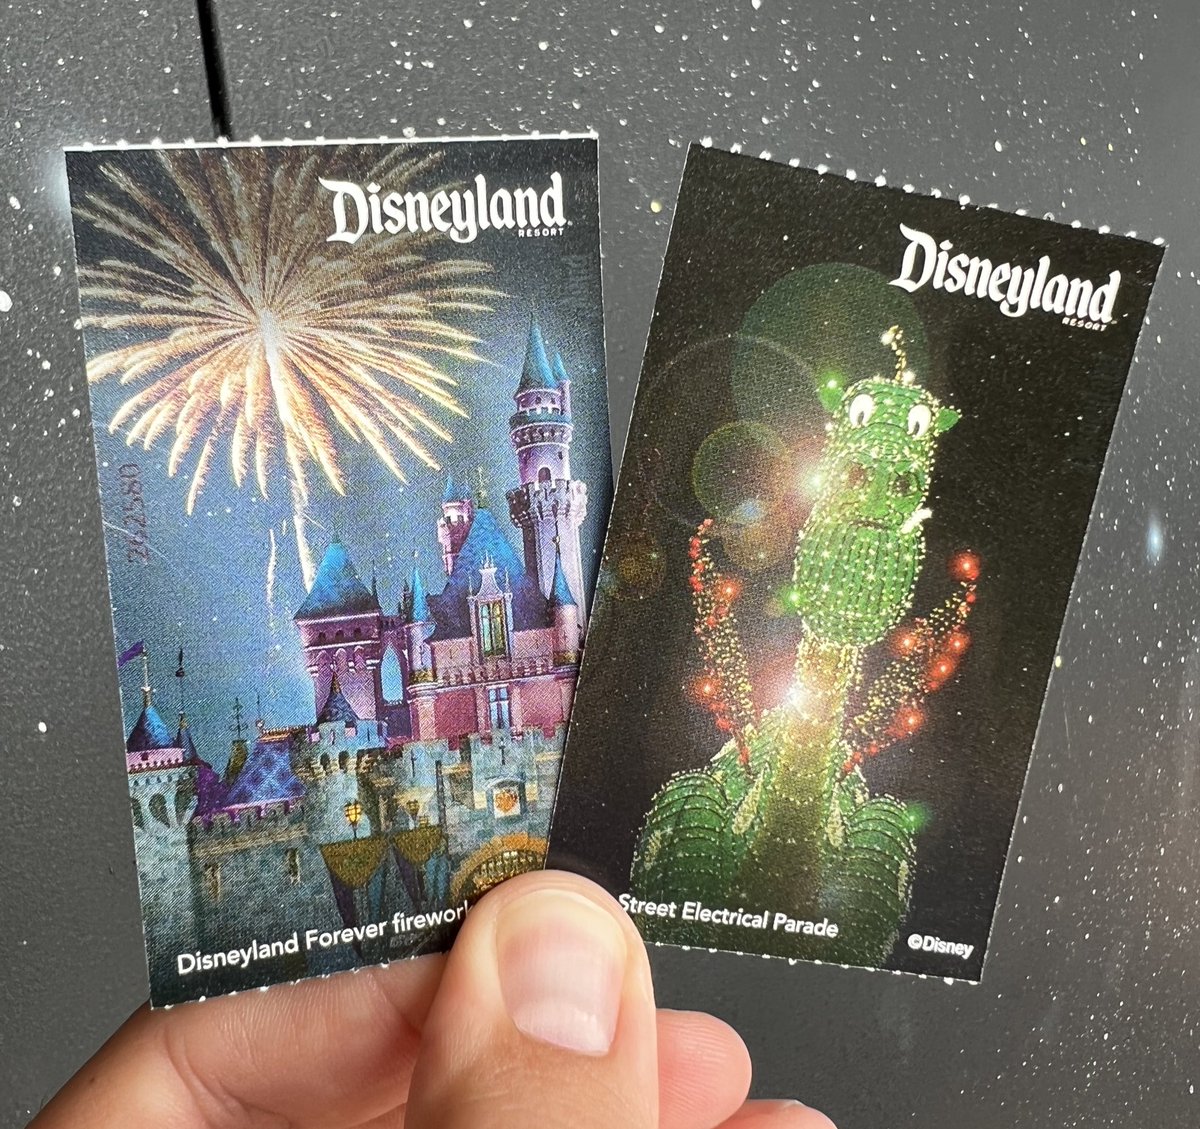 RT @dlnt: New Disneyland Resort park tickets feature the returning nighttime spectaculars https://t.co/H94cBmBbBd